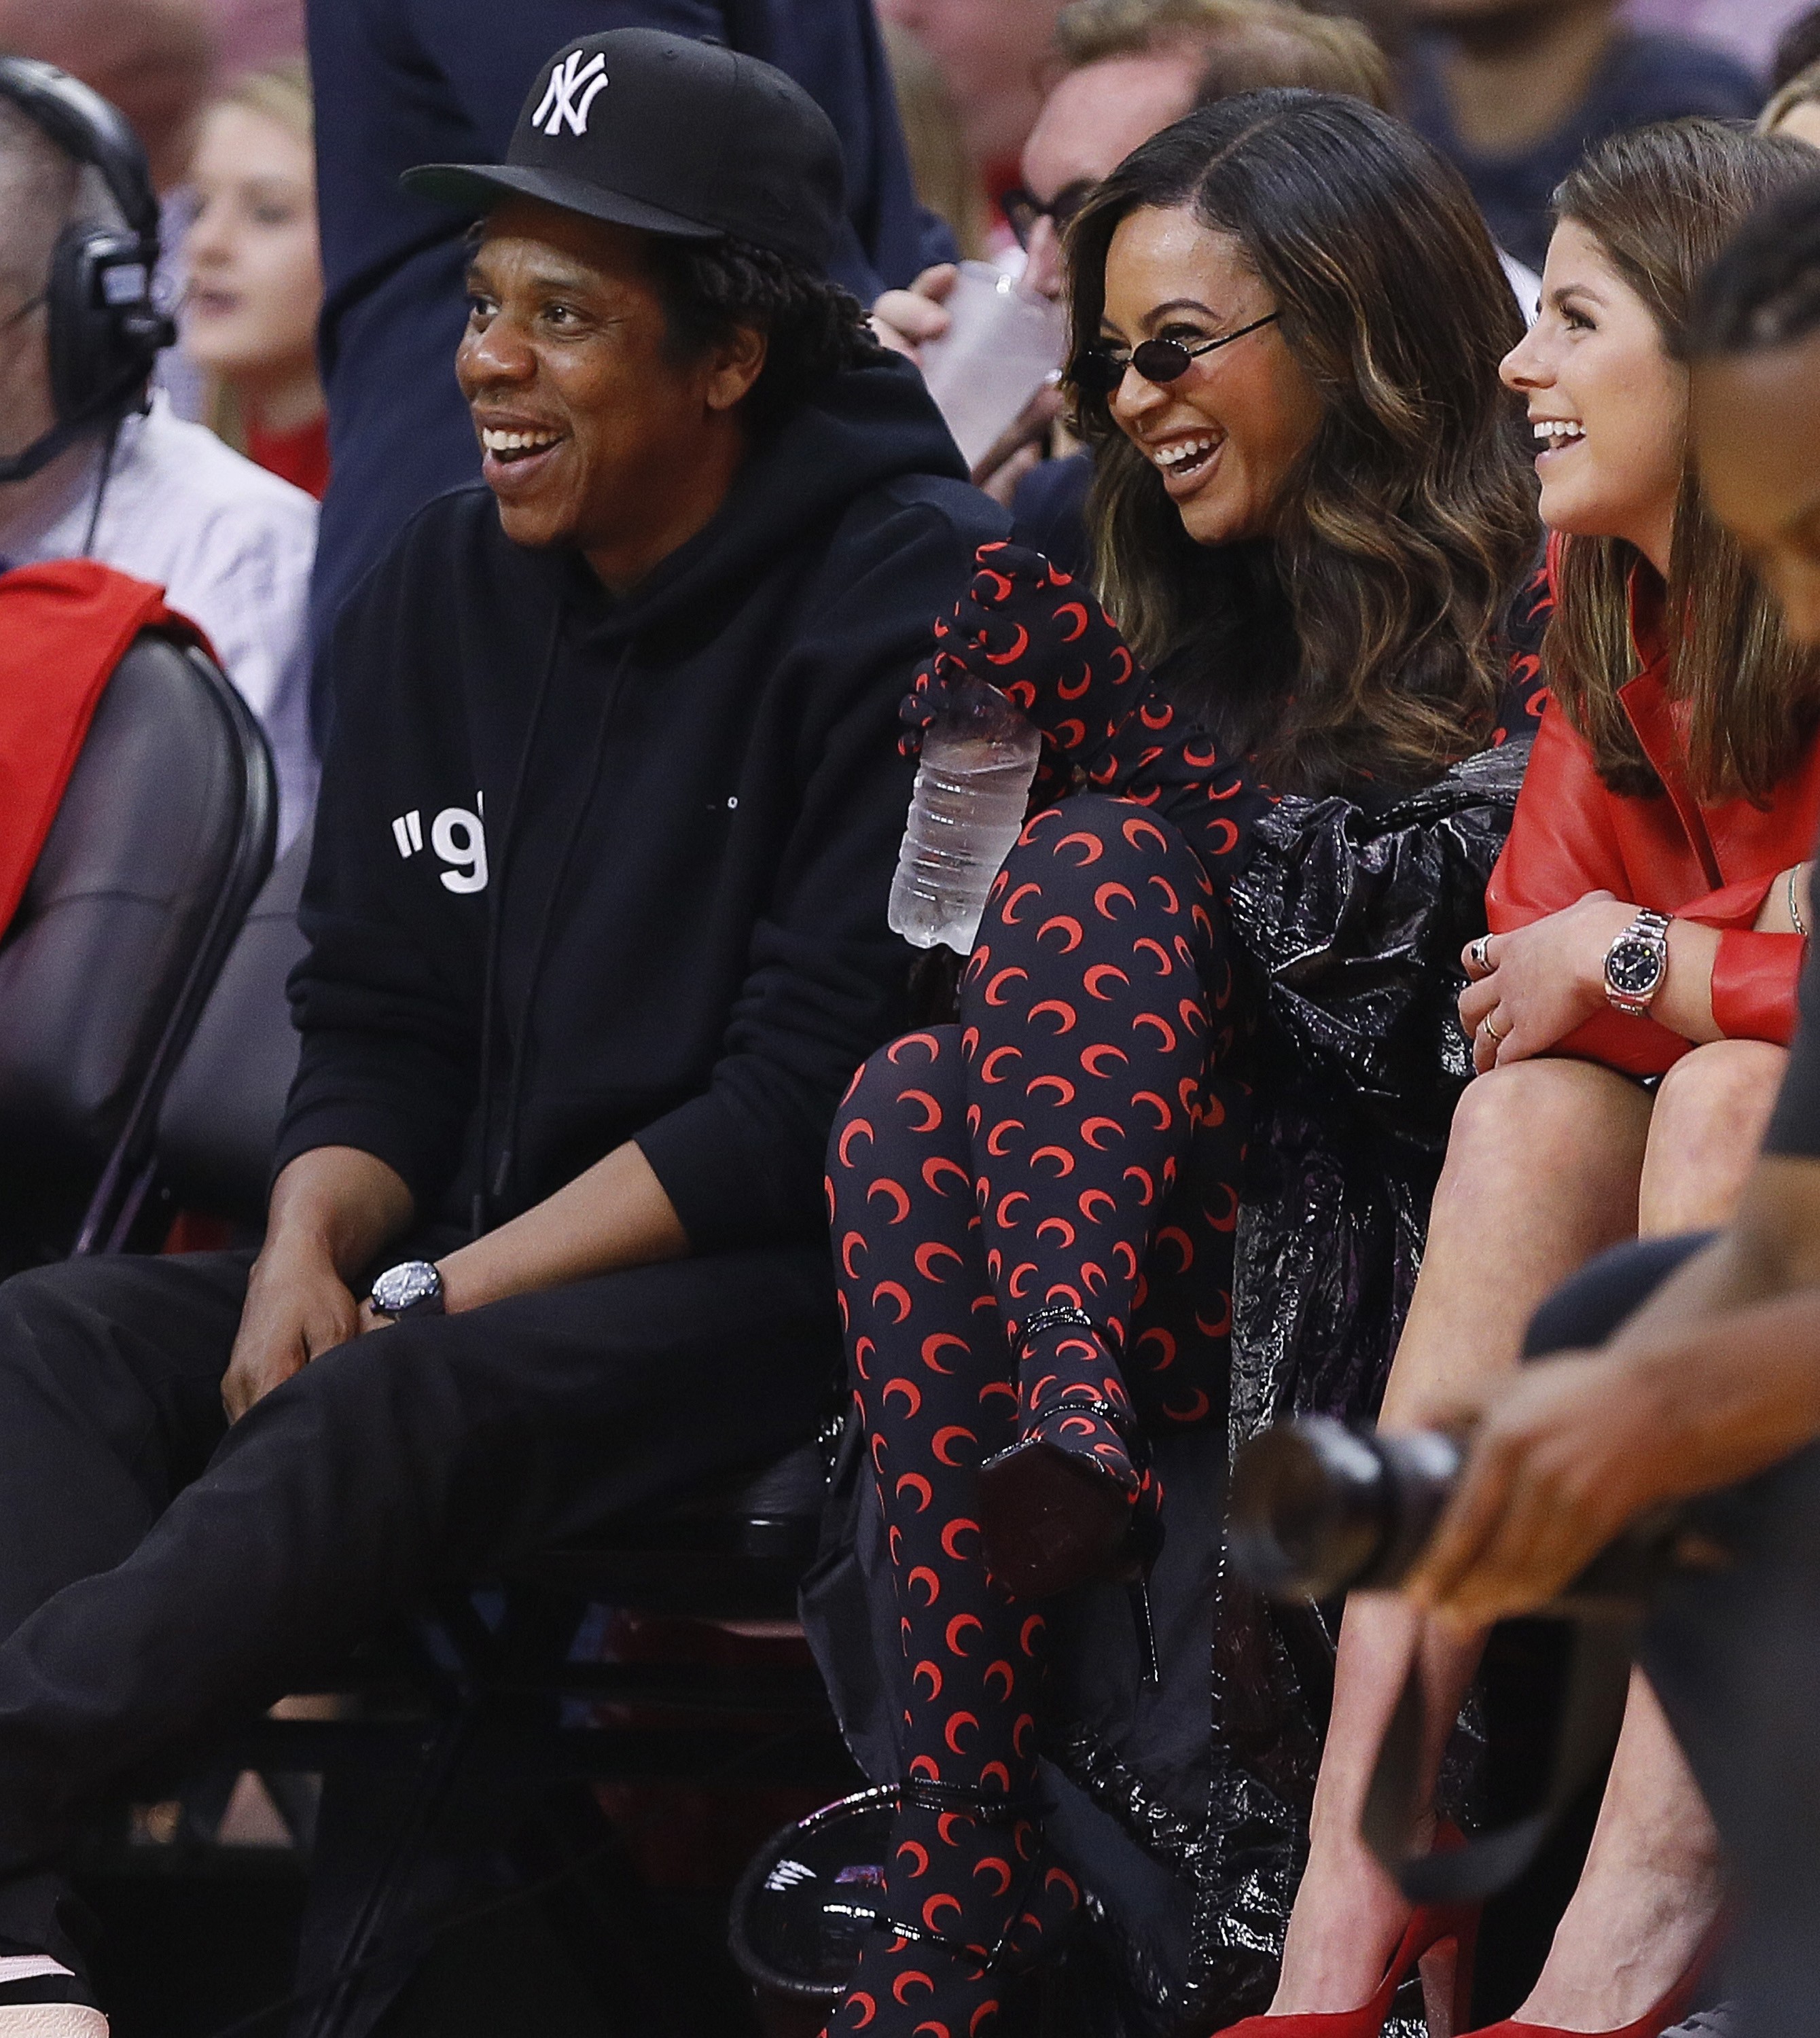 HOUSTON, TEXAS - MAY 10: Jay-Z and Beyonce watch from courtside  during Game Six of the Western Conference Semifinals of the 2019 NBA Playoffs at Toyota Center on May 10, 2019 in Houston, Texas. NOTE TO USER: User expressly acknowledges and agrees that, b (Foto: Getty Images)